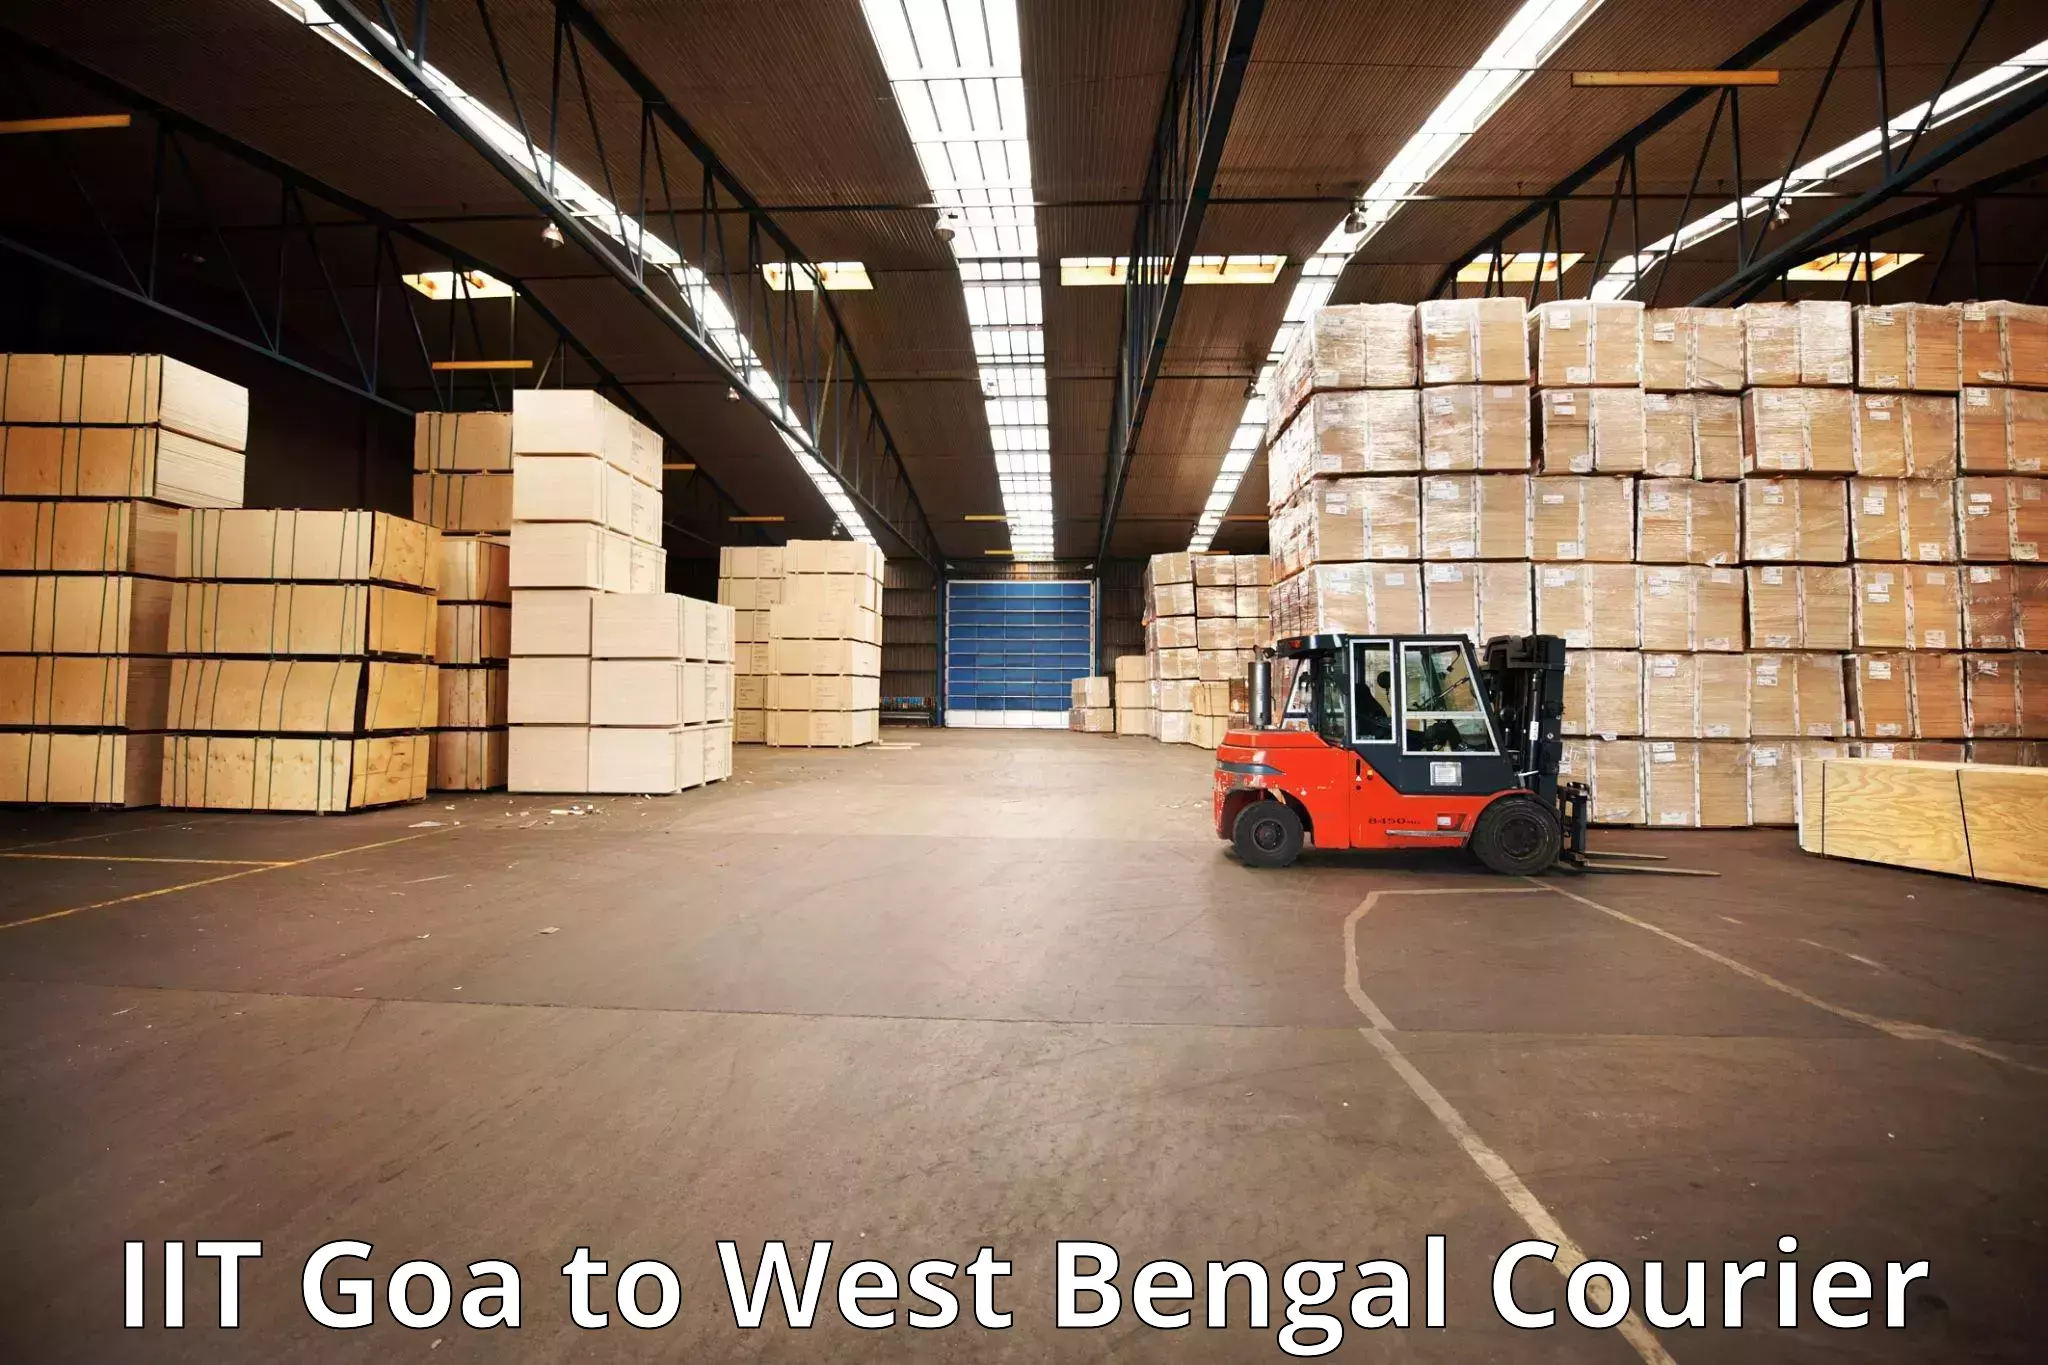 Baggage transport professionals IIT Goa to West Bengal